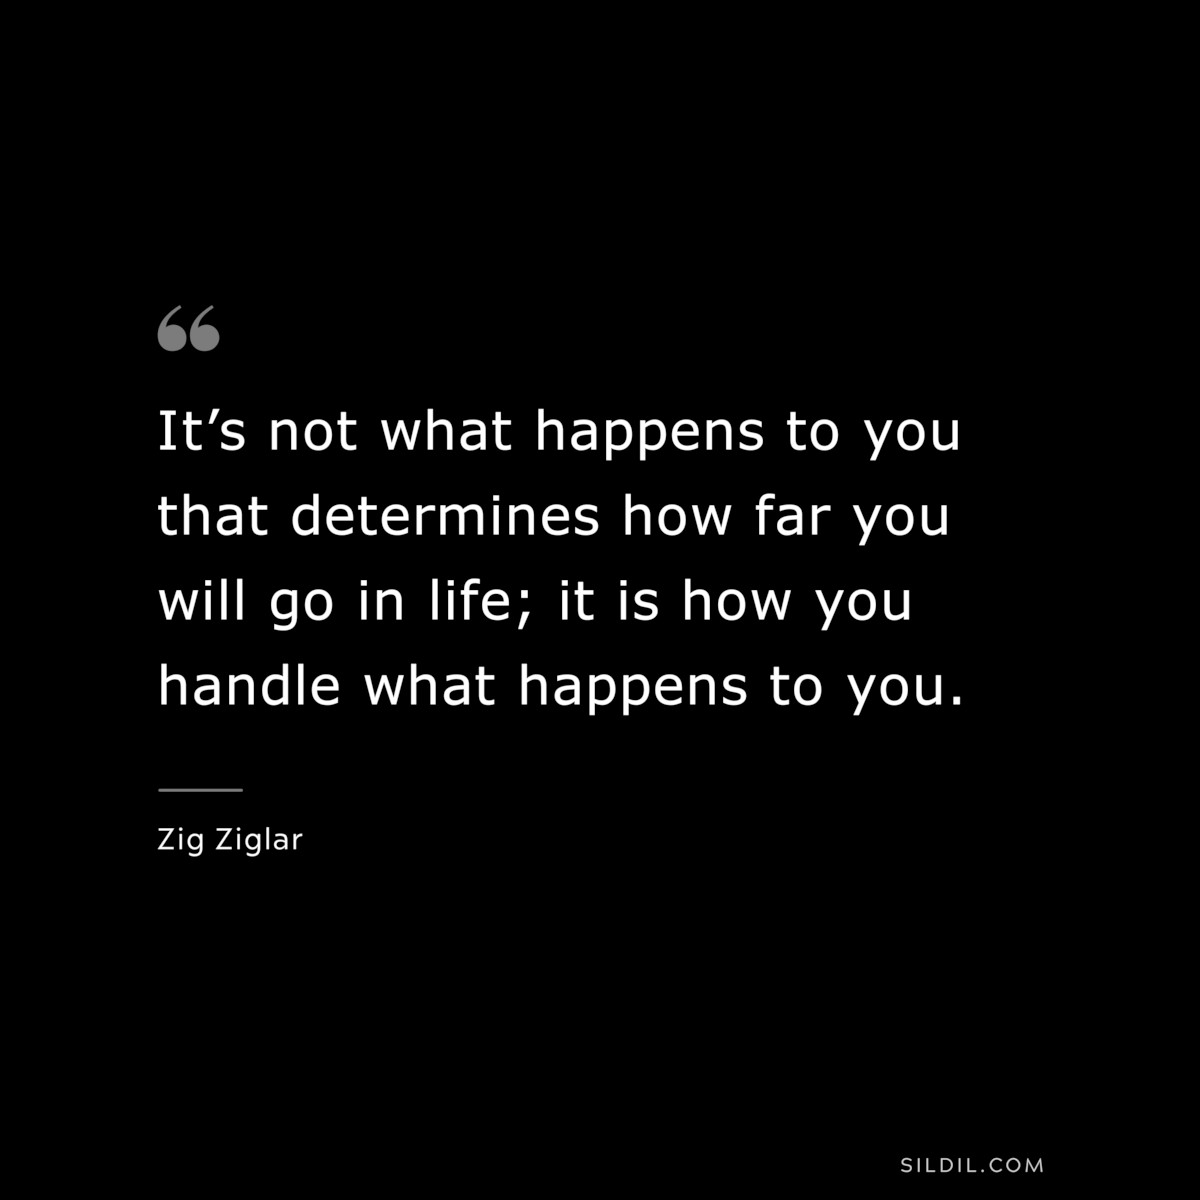 It’s not what happens to you that determines how far you will go in life; it is how you handle what happens to you. ― Zig Ziglar